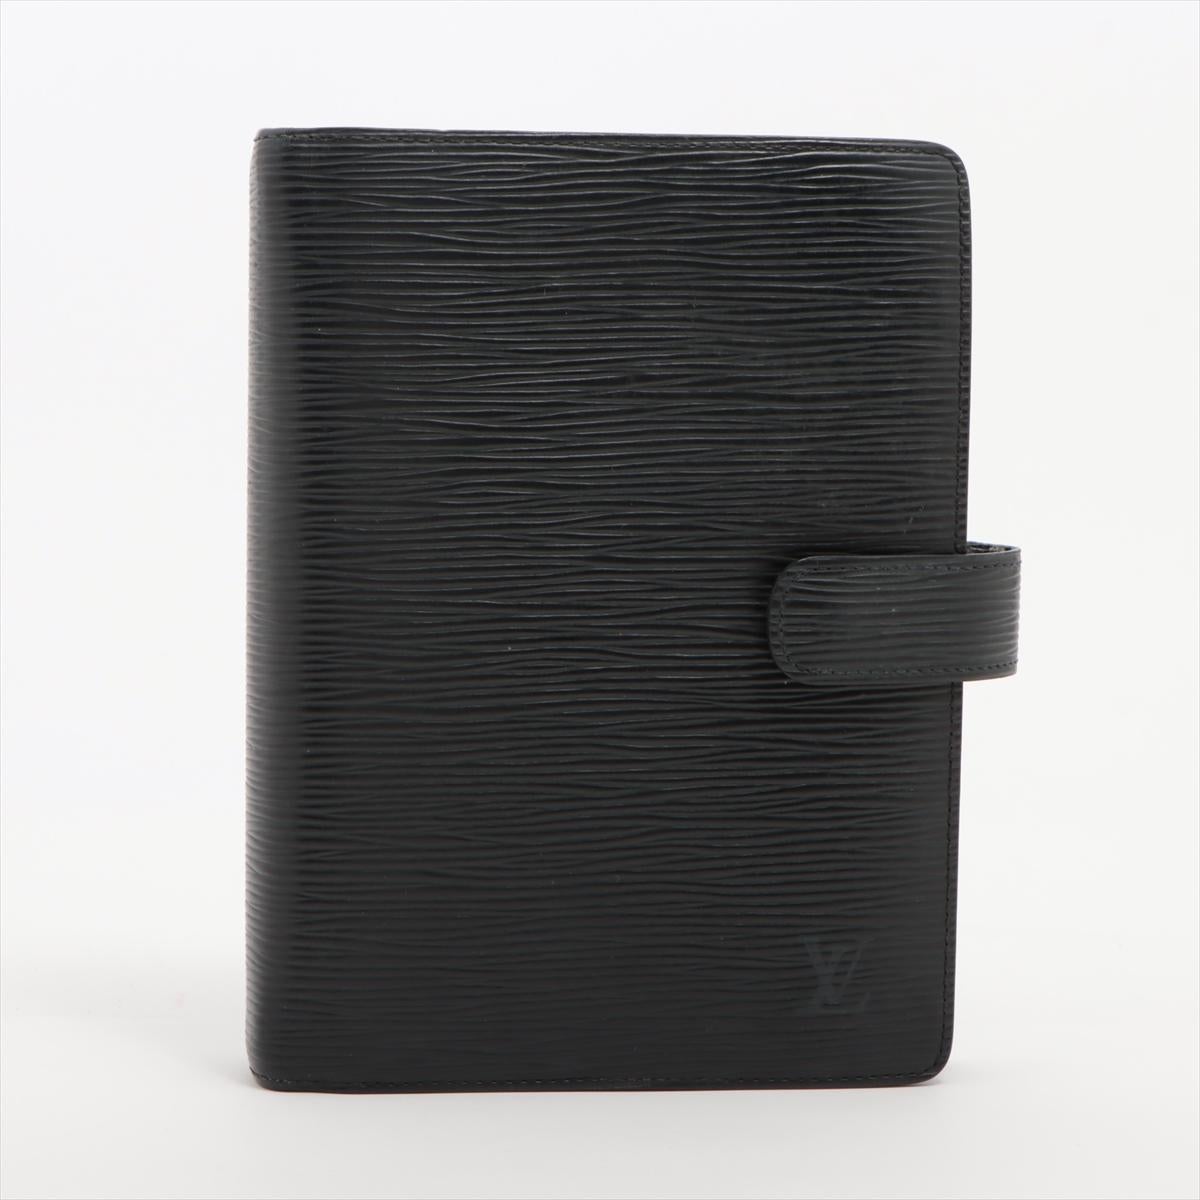 The Louis Vuitton Epi Agenda MM Notebook Cover in black is a luxurious and functional accessory that combines style with practicality. Crafted with Louis Vuitton's iconic Epi leather, the notebook cover exudes sophistication and elegance. The